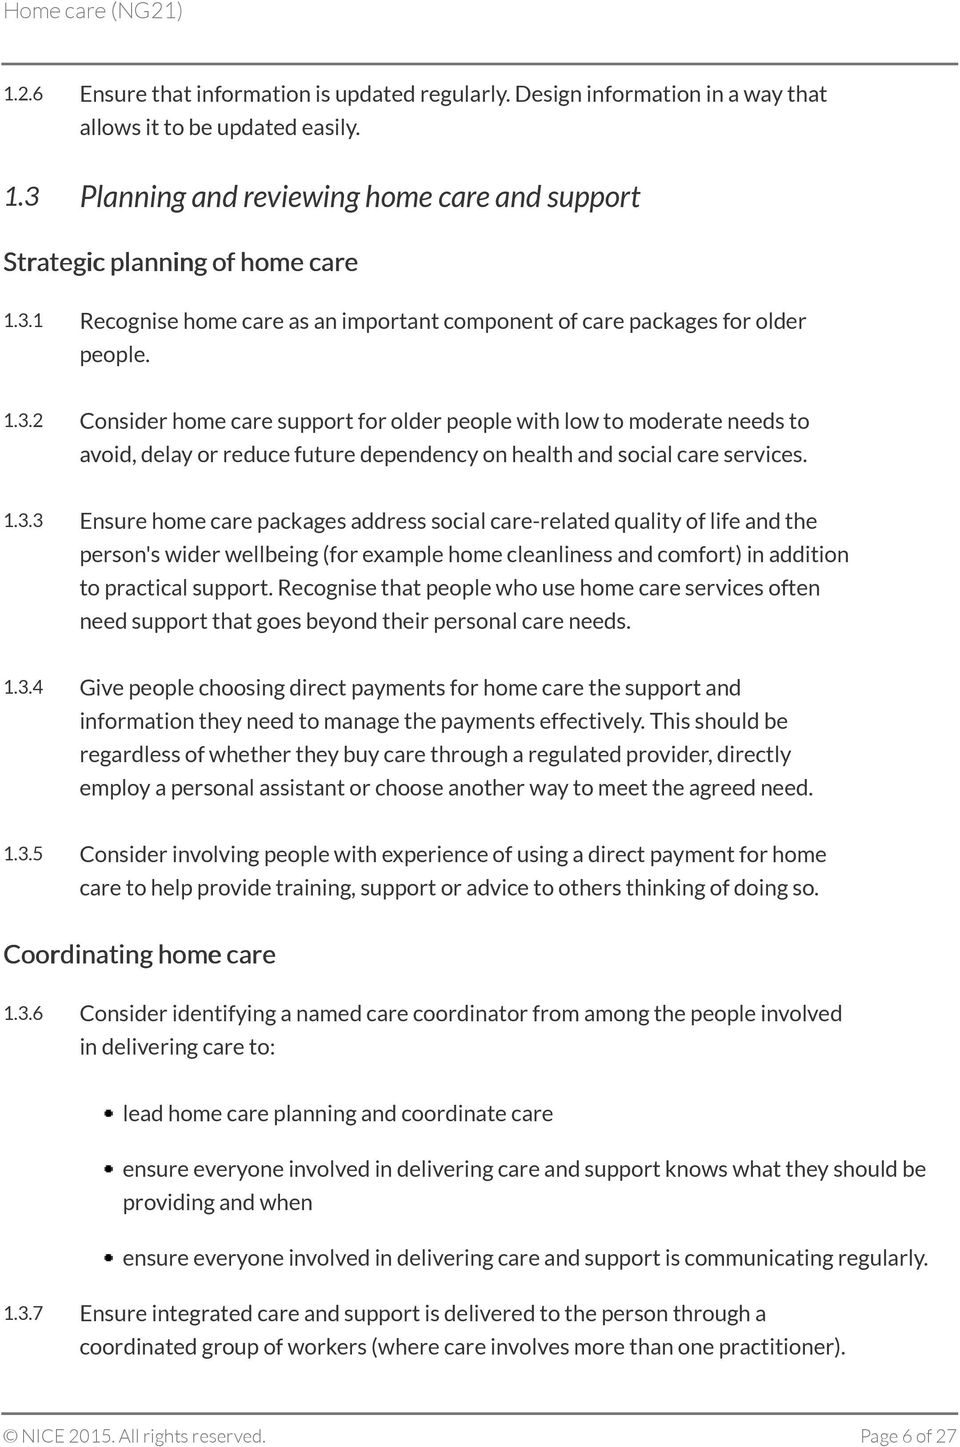 1.3.3 Ensure home care packages address social care-related quality of life and the person's wider wellbeing (for example home cleanliness and comfort) in addition to practical support.